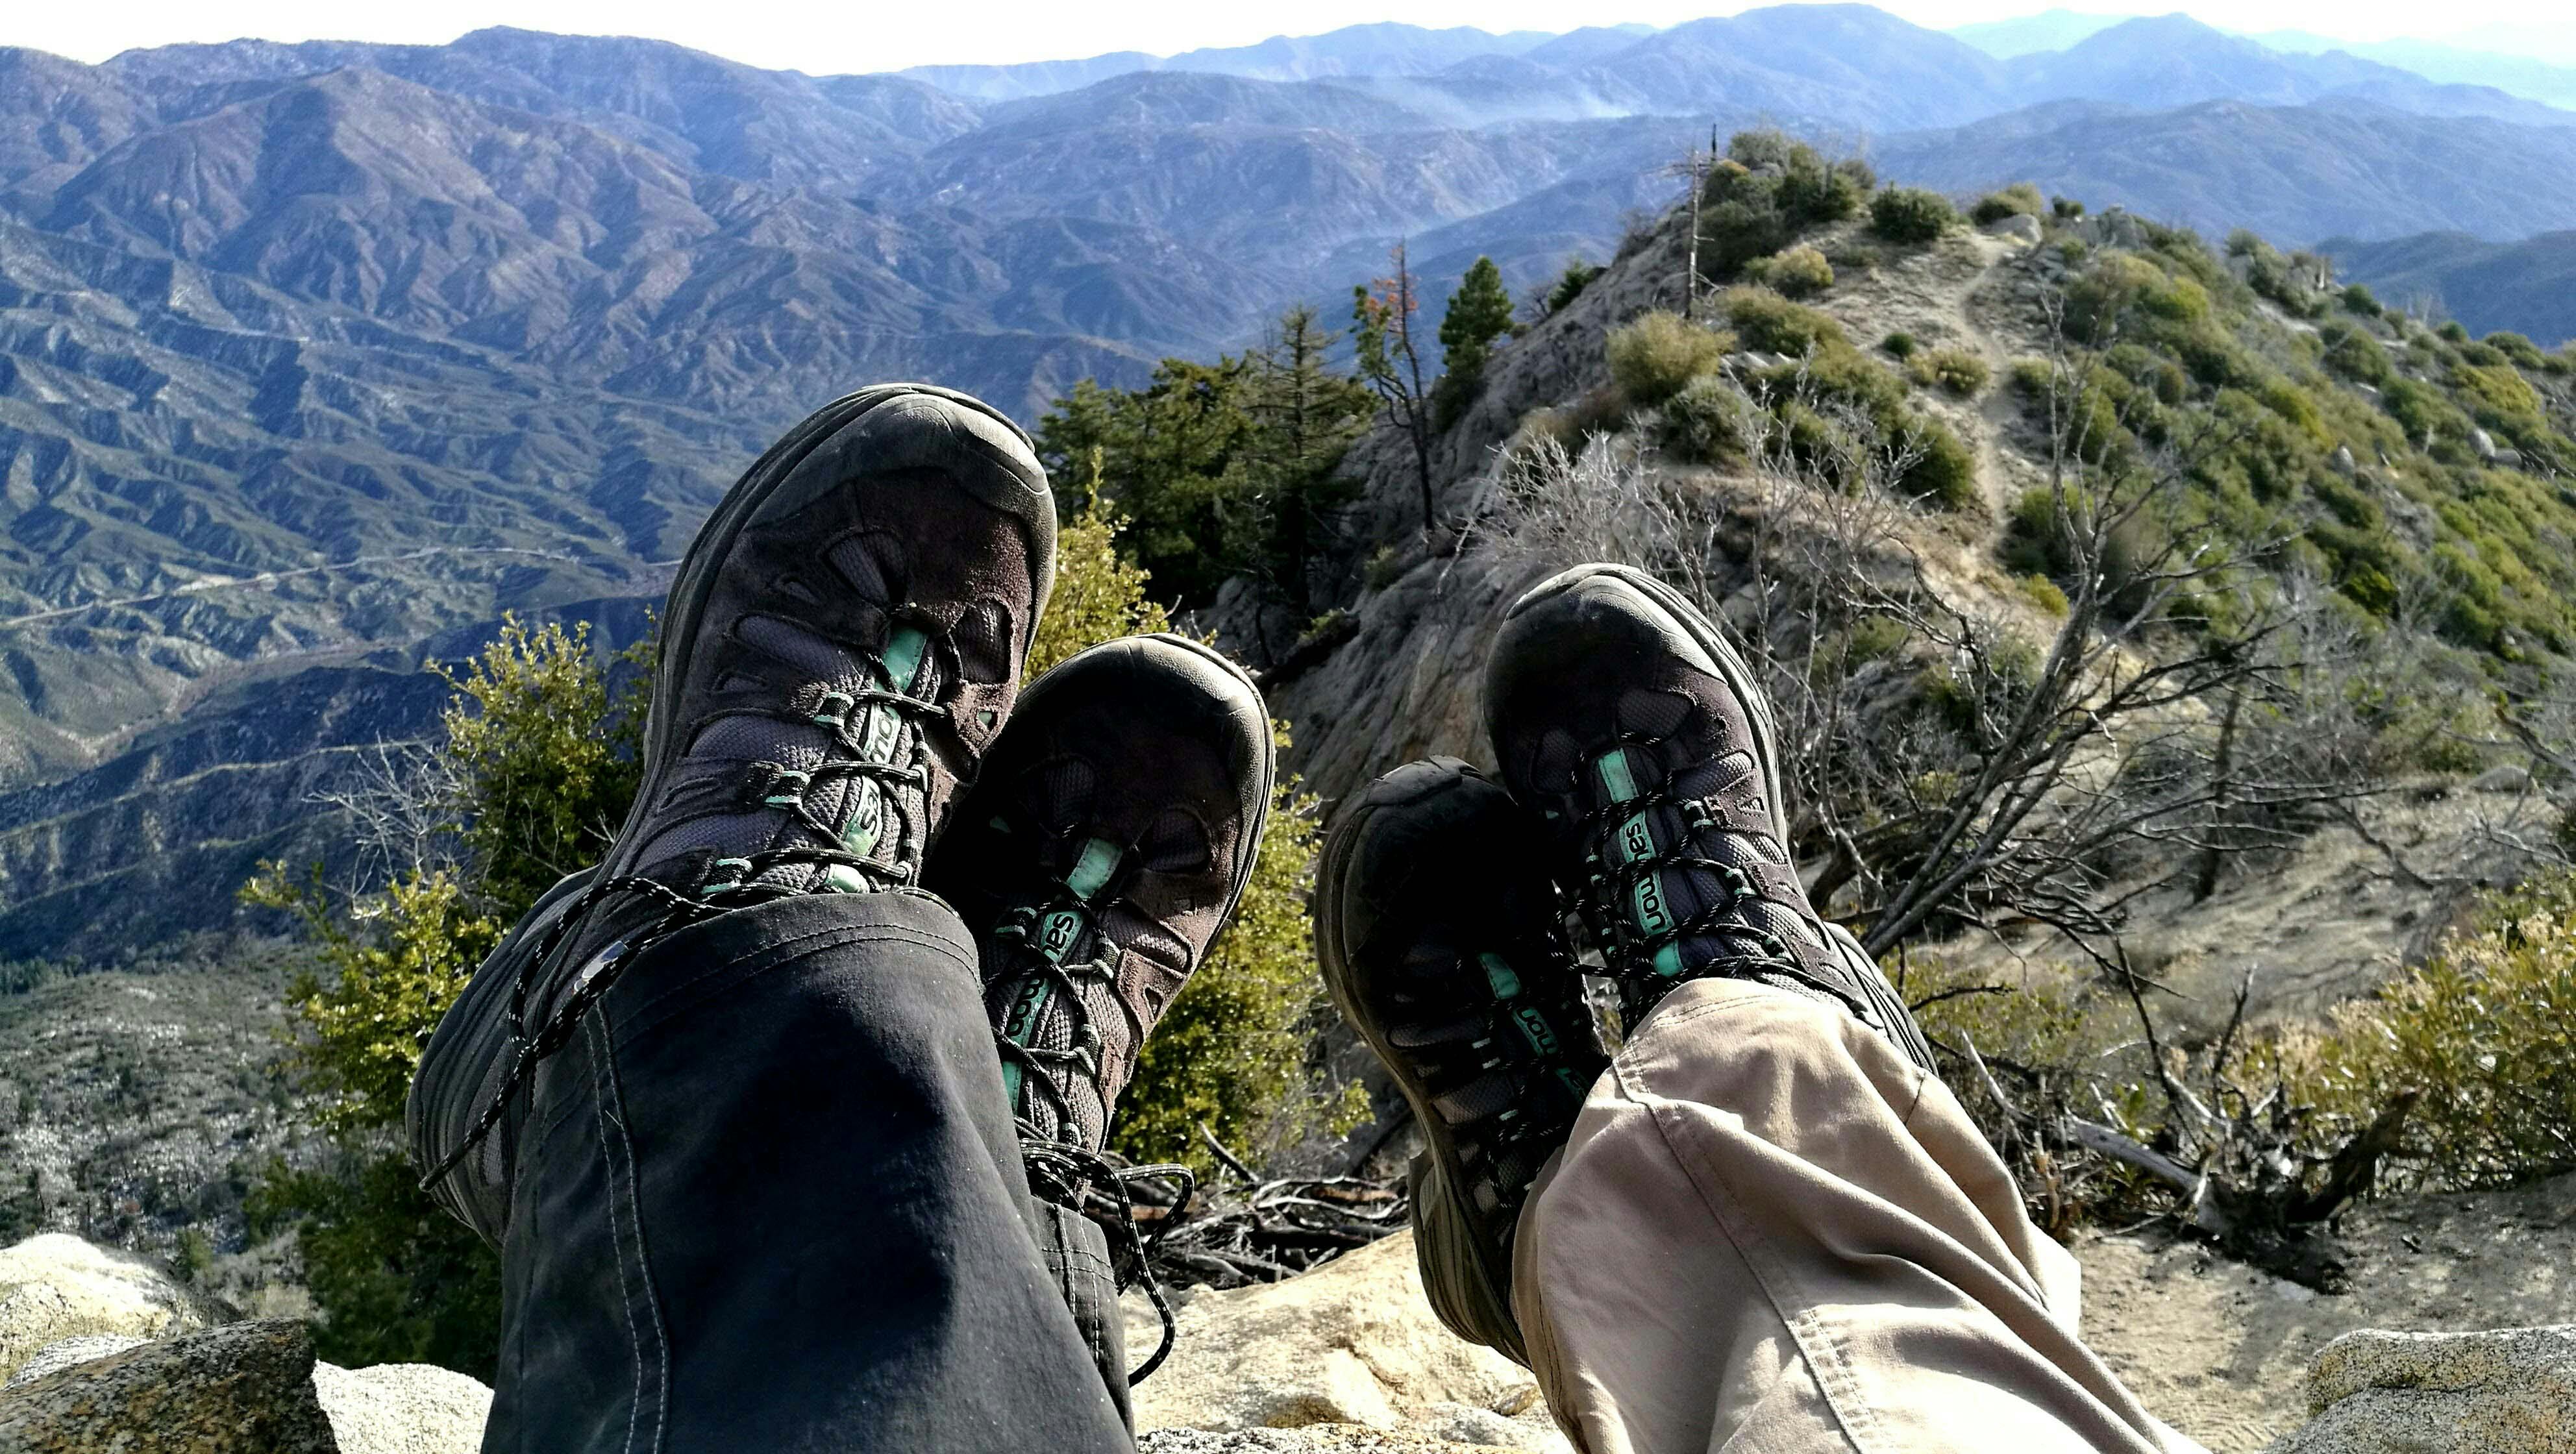 Hiking Vs. Trekking - Which Adventure Style Suits You Best?